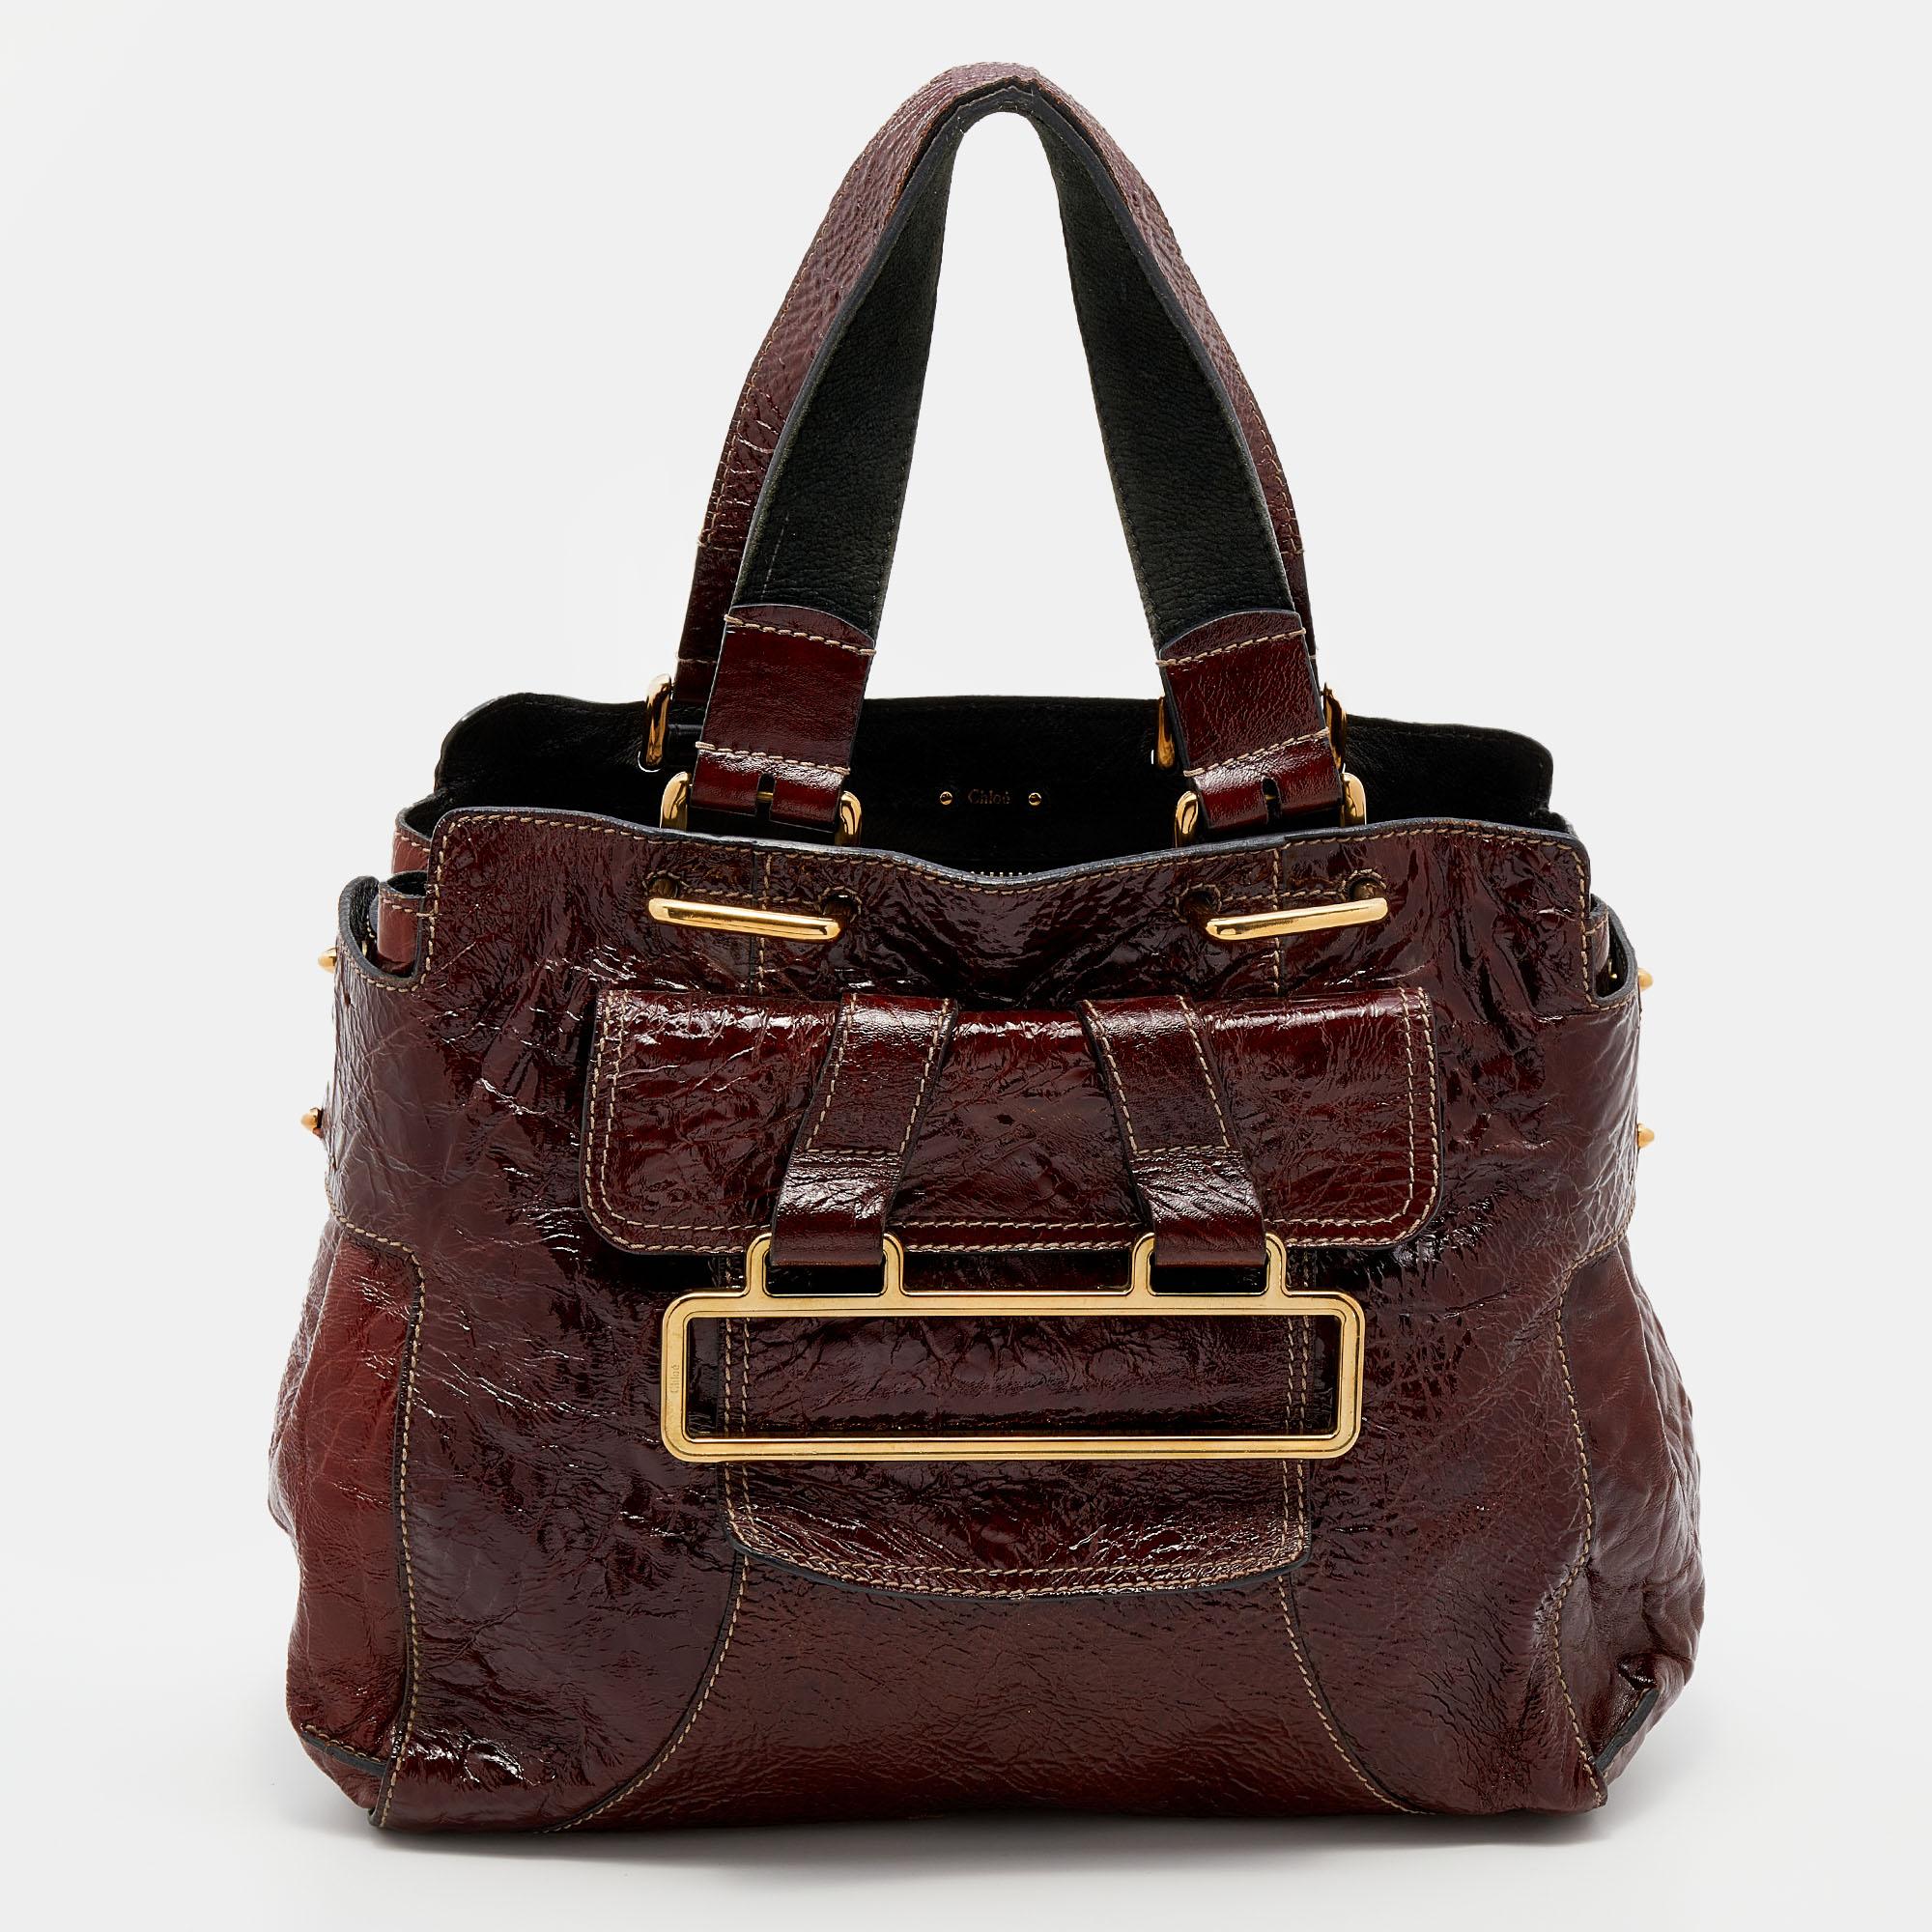 Chloé brings you this lovely satchel that has been crafted using patent leather and detailed with gold-tone metal accents. It has a well-sized fabric interior, front flap pocket, and two top handles. This bag is perfect for everyday use.

